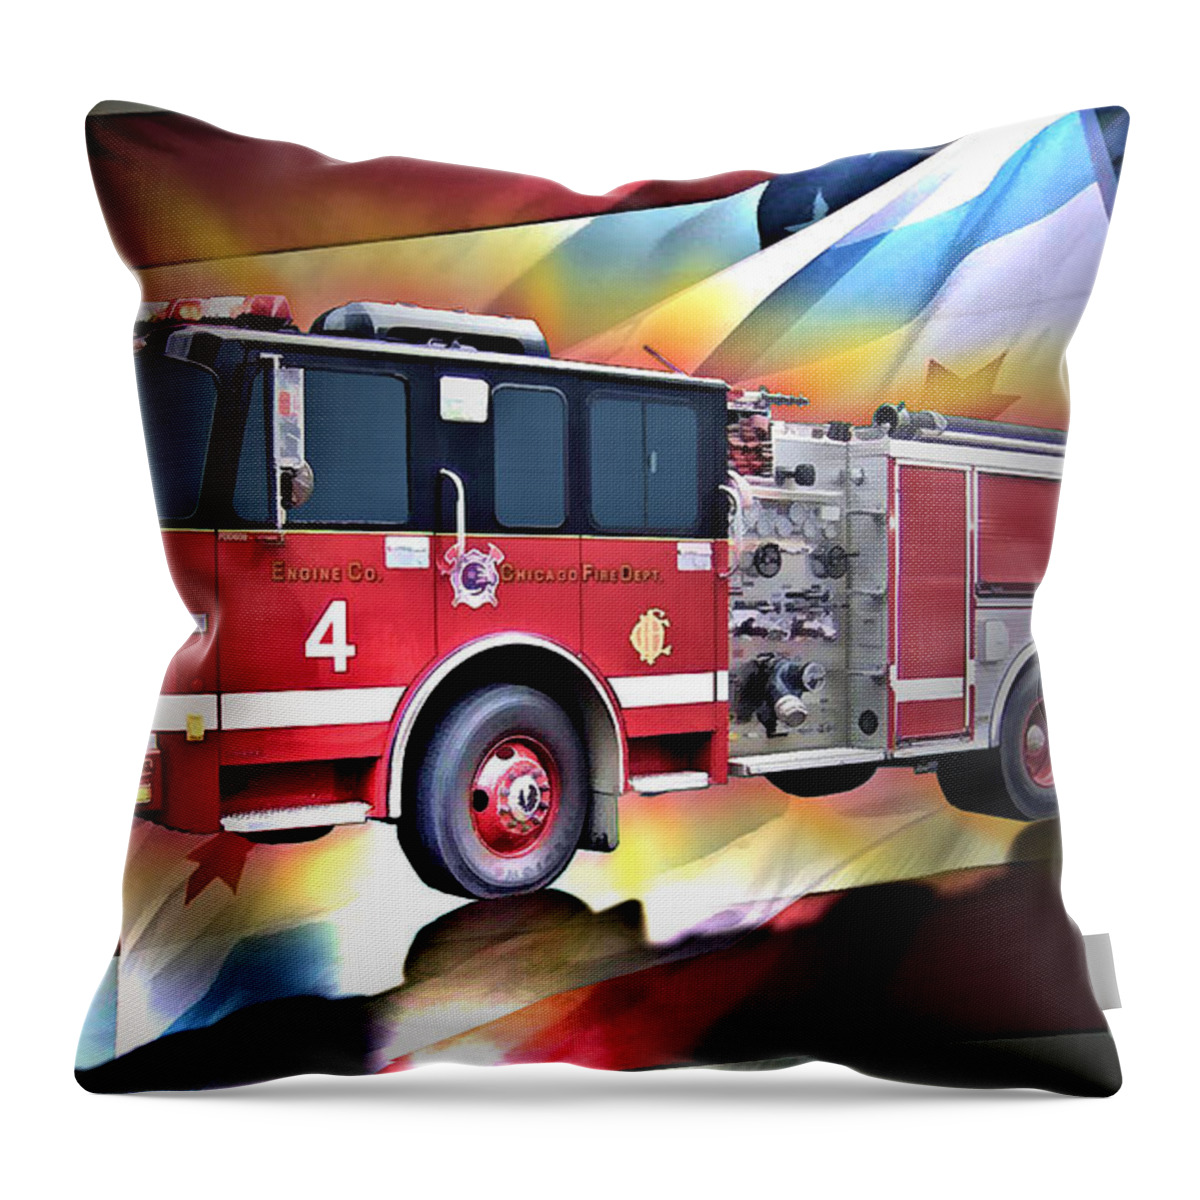 Chicago Throw Pillow featuring the digital art Chicago Eng 4 by Tommy Anderson